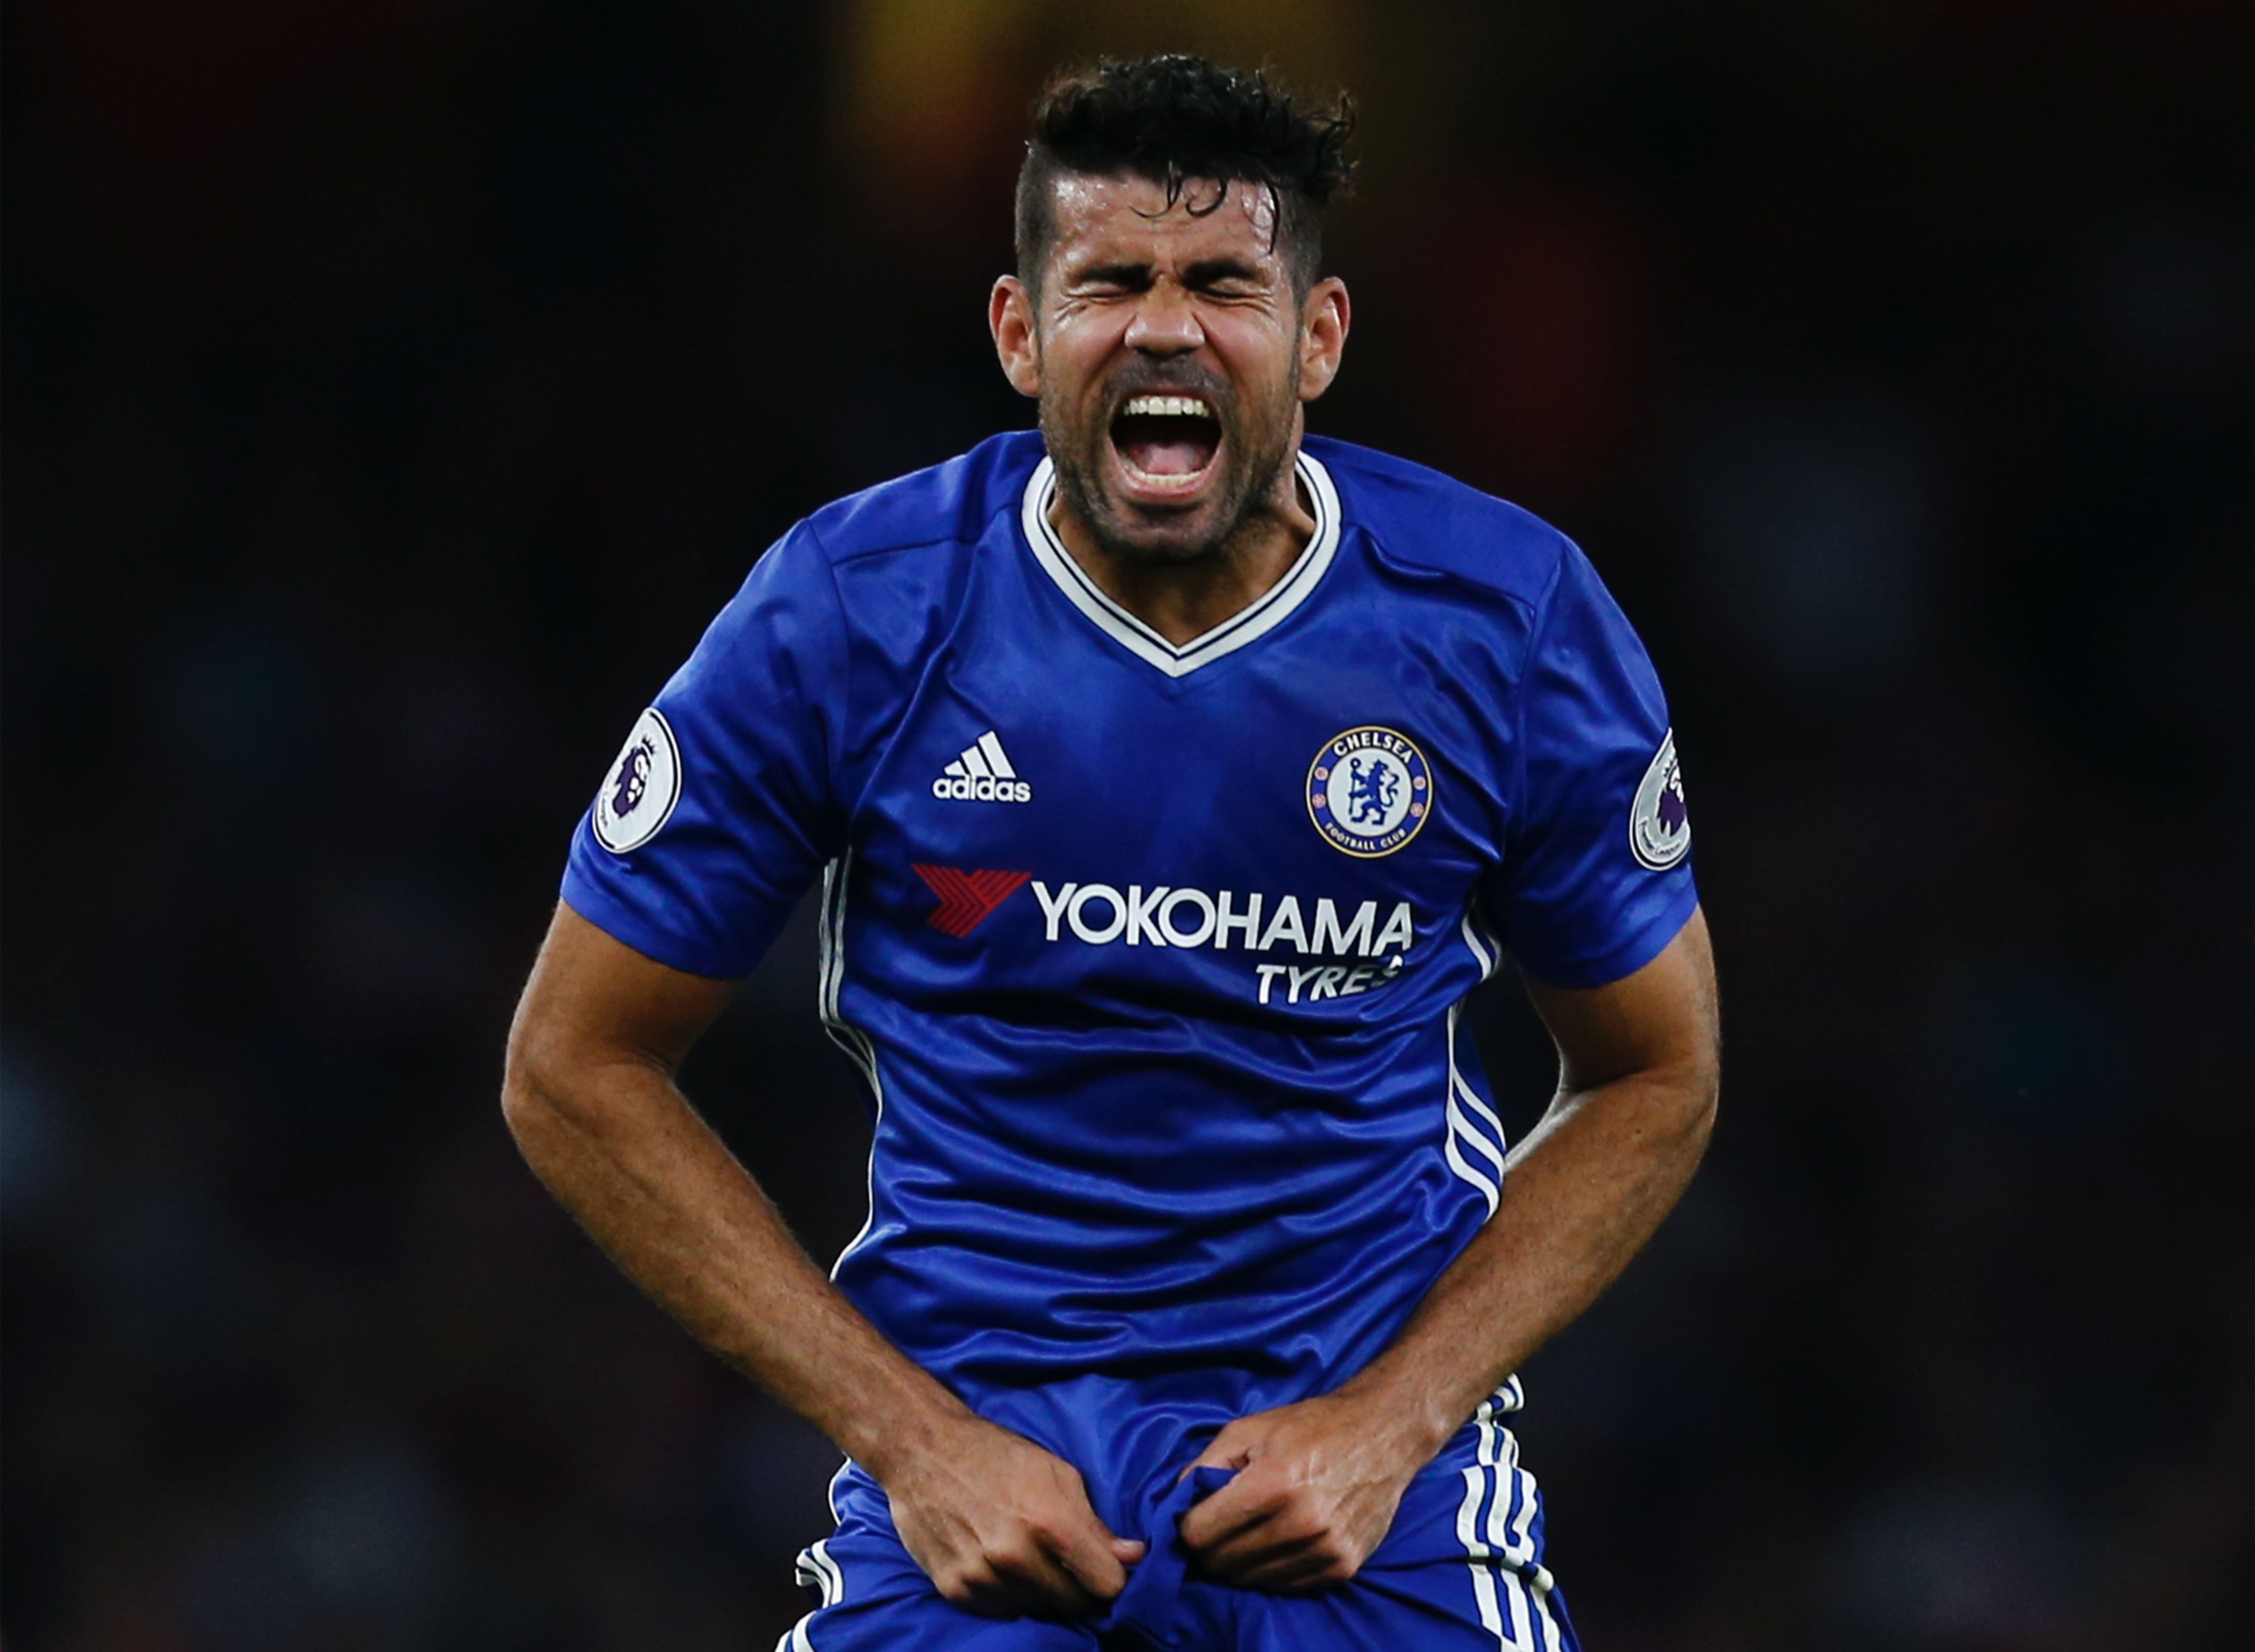 Chelsea's Brazilian-born Spanish striker Diego Costa reacts during the English Premier League football match between Arsenal and Chelsea at The Emirates stadium in London, on September 24, 2016. (Photo by Ian Kington/AFP/Getty Images)